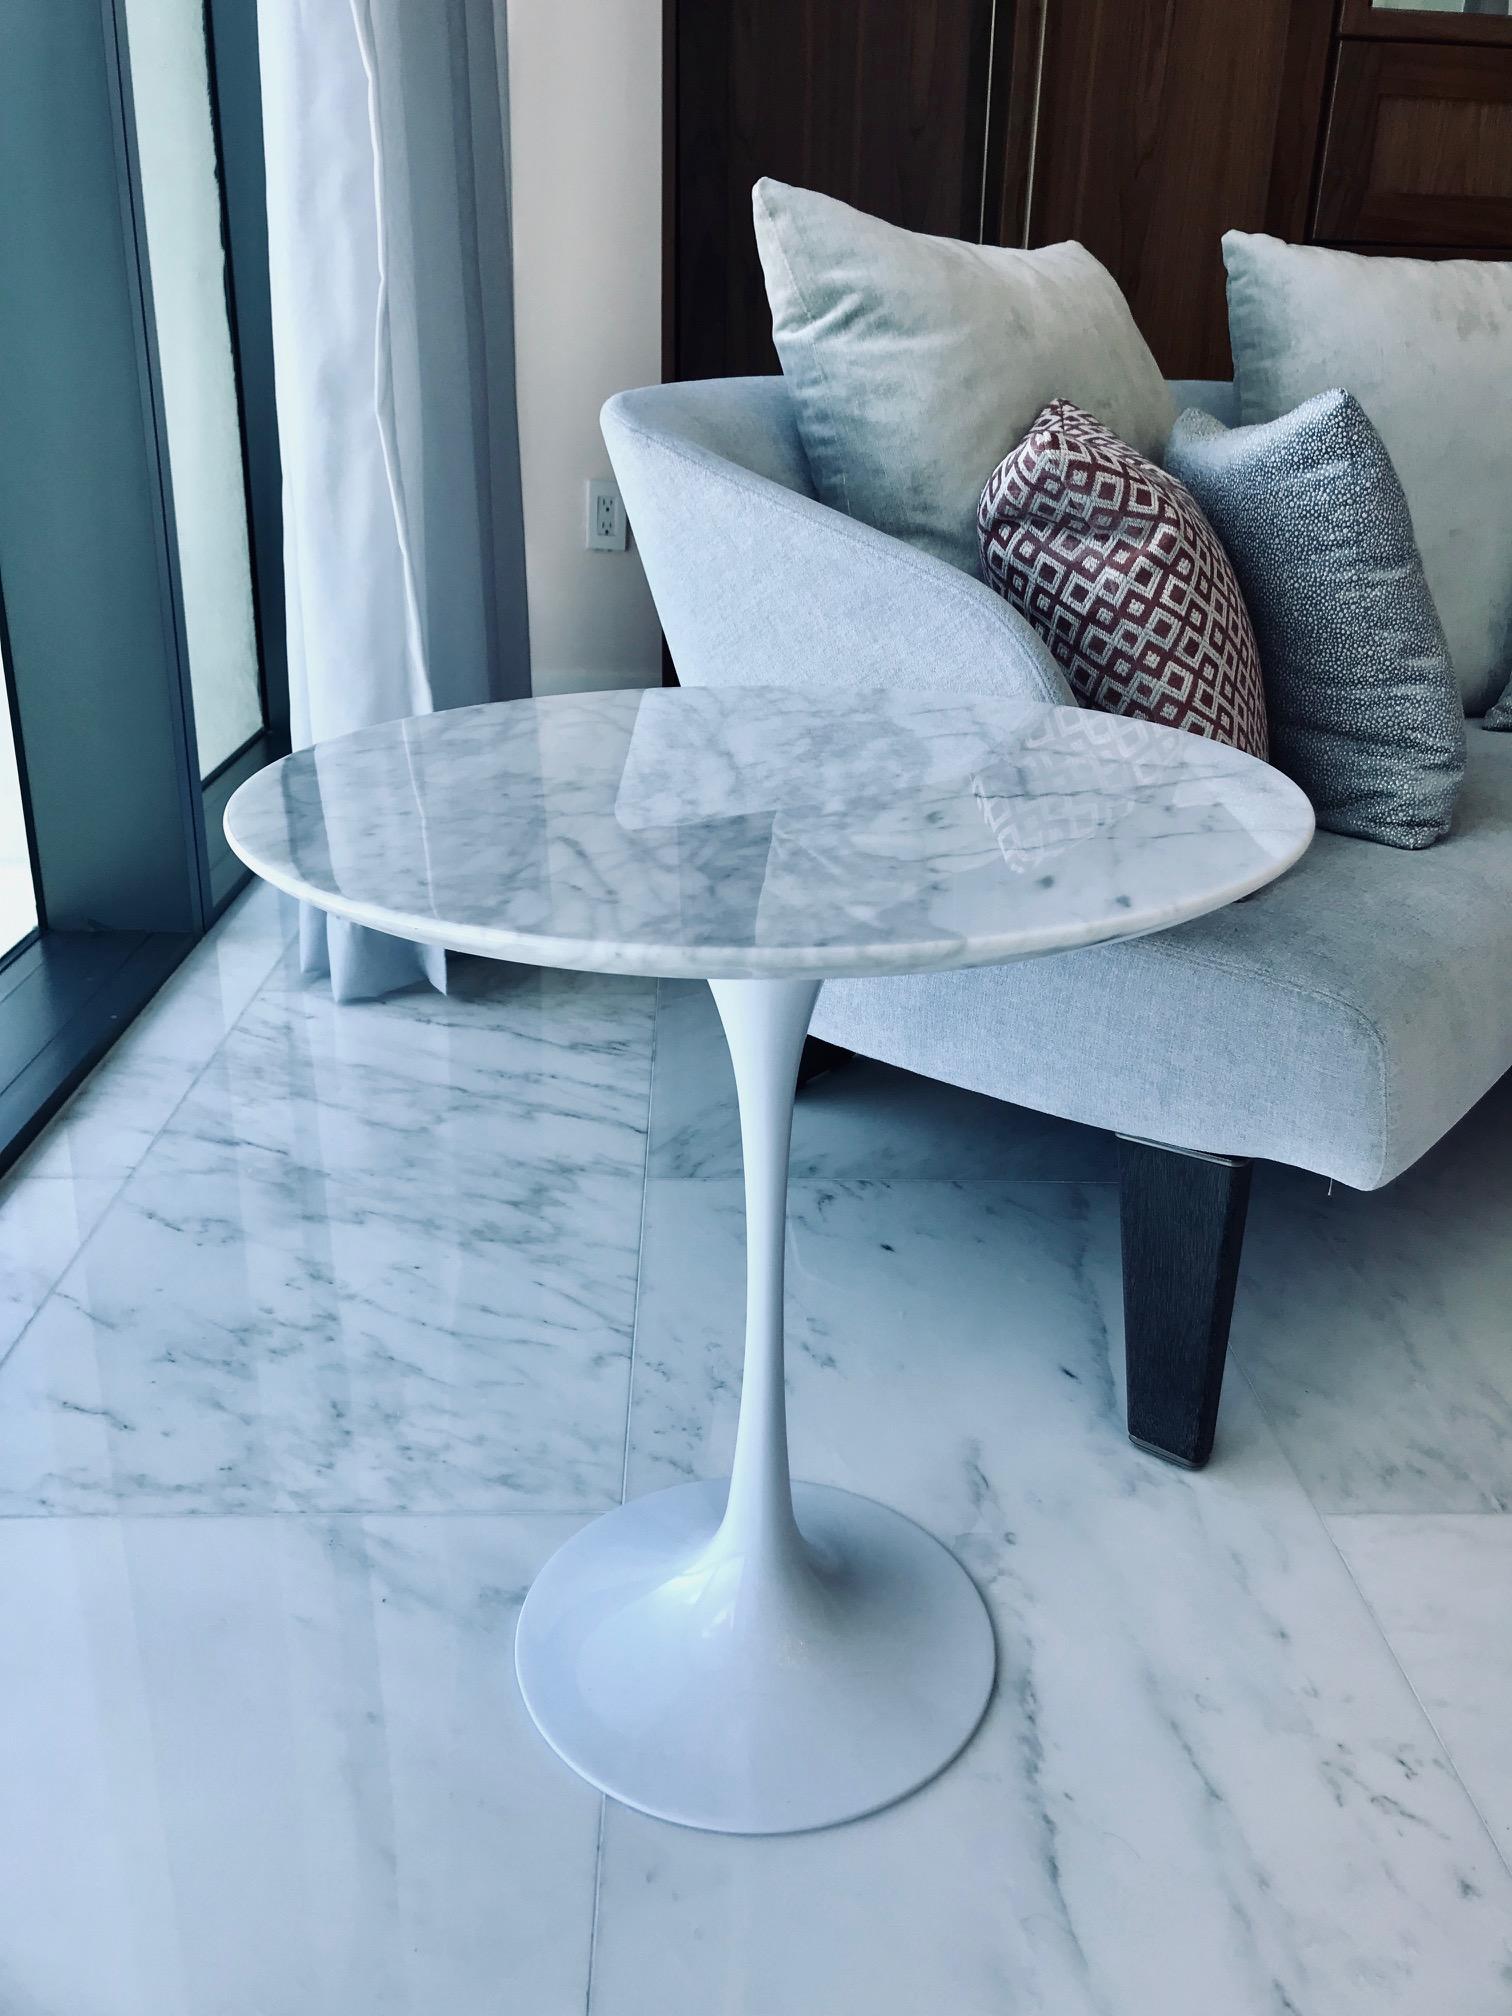 The iconic tulip side table comprised of solid arabescato Carrara marble top over a stylized cast metal base in a white gloss enamel finish. Originally designed by Eero Saarinen in the late 1950s. Fitted with round polished white marble top with